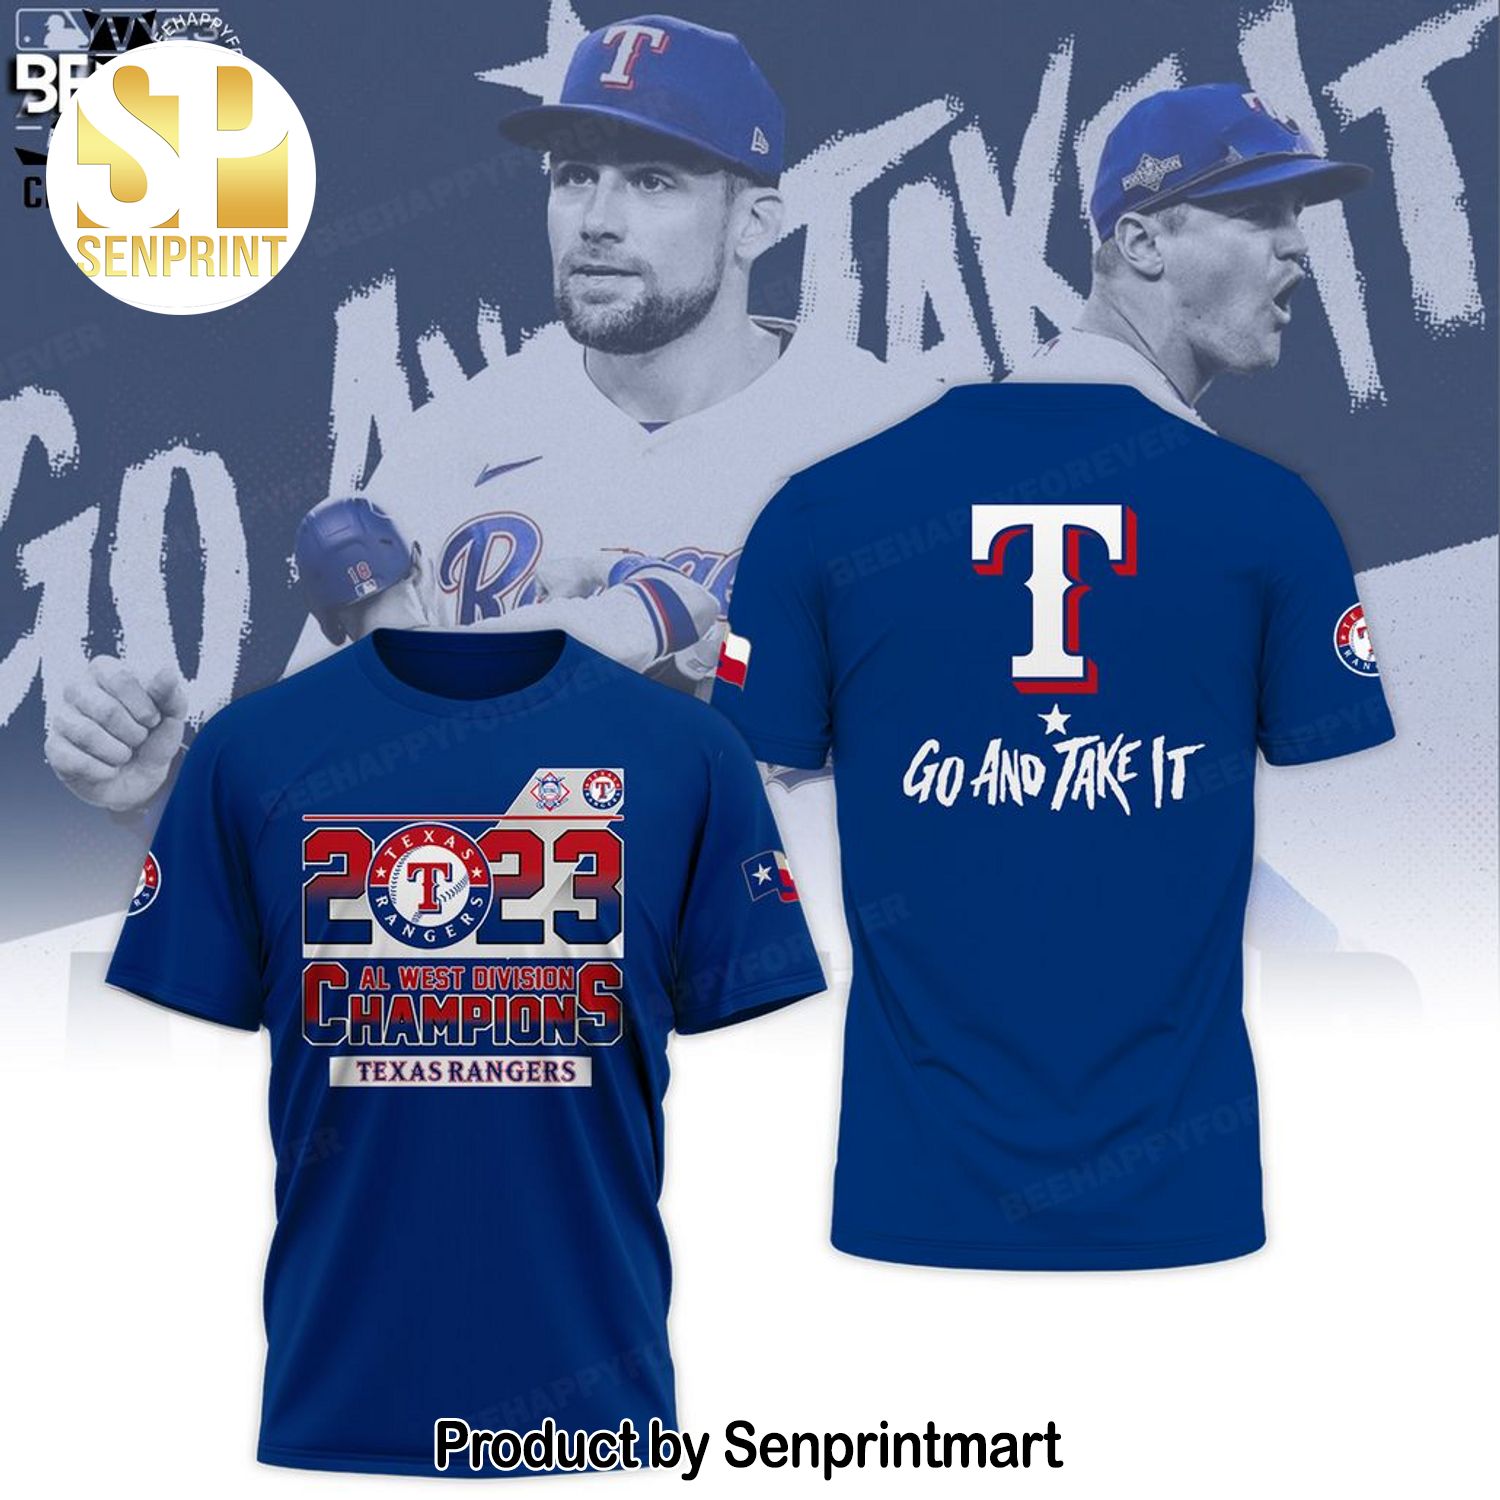 2023 Texas Rangers Al West Division Champions Go And Take It 3D Shirt